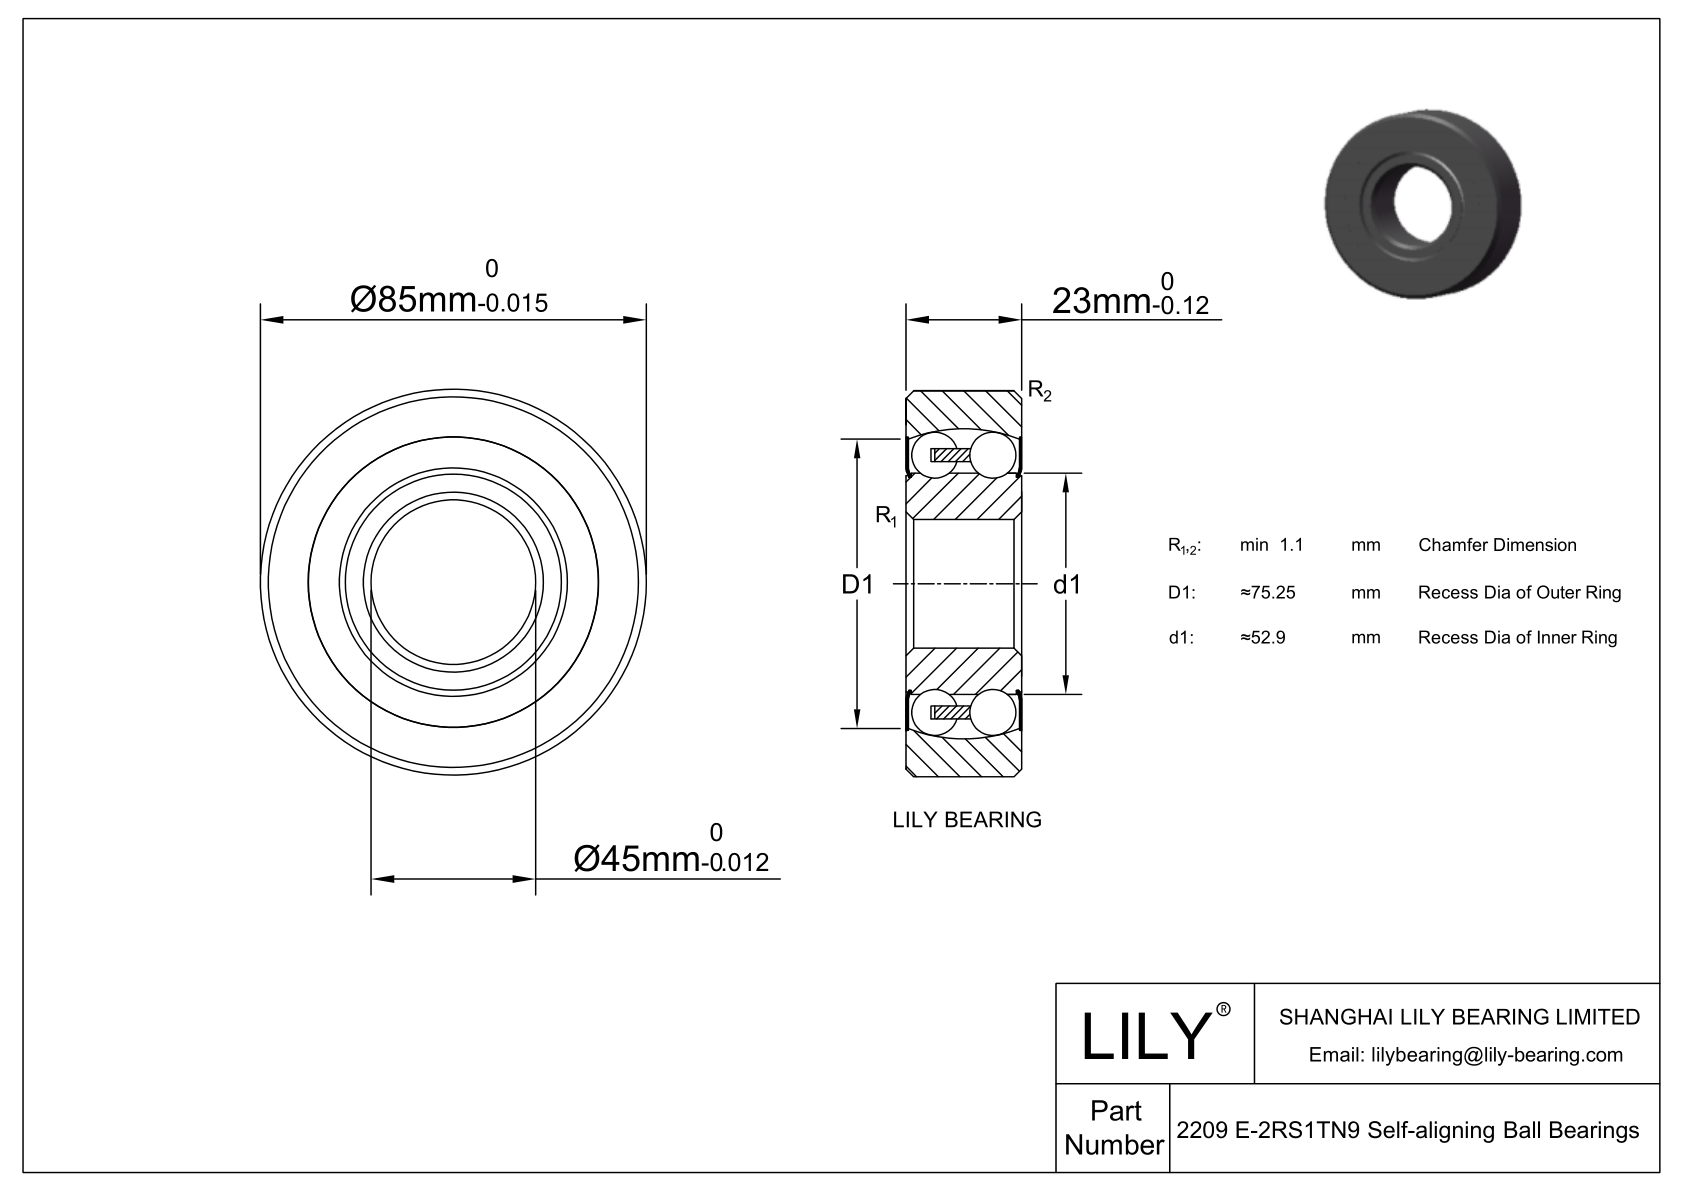 S2209 E-2RS1TN9 Stainless Steel Self Aligning Ball Bearings cad drawing